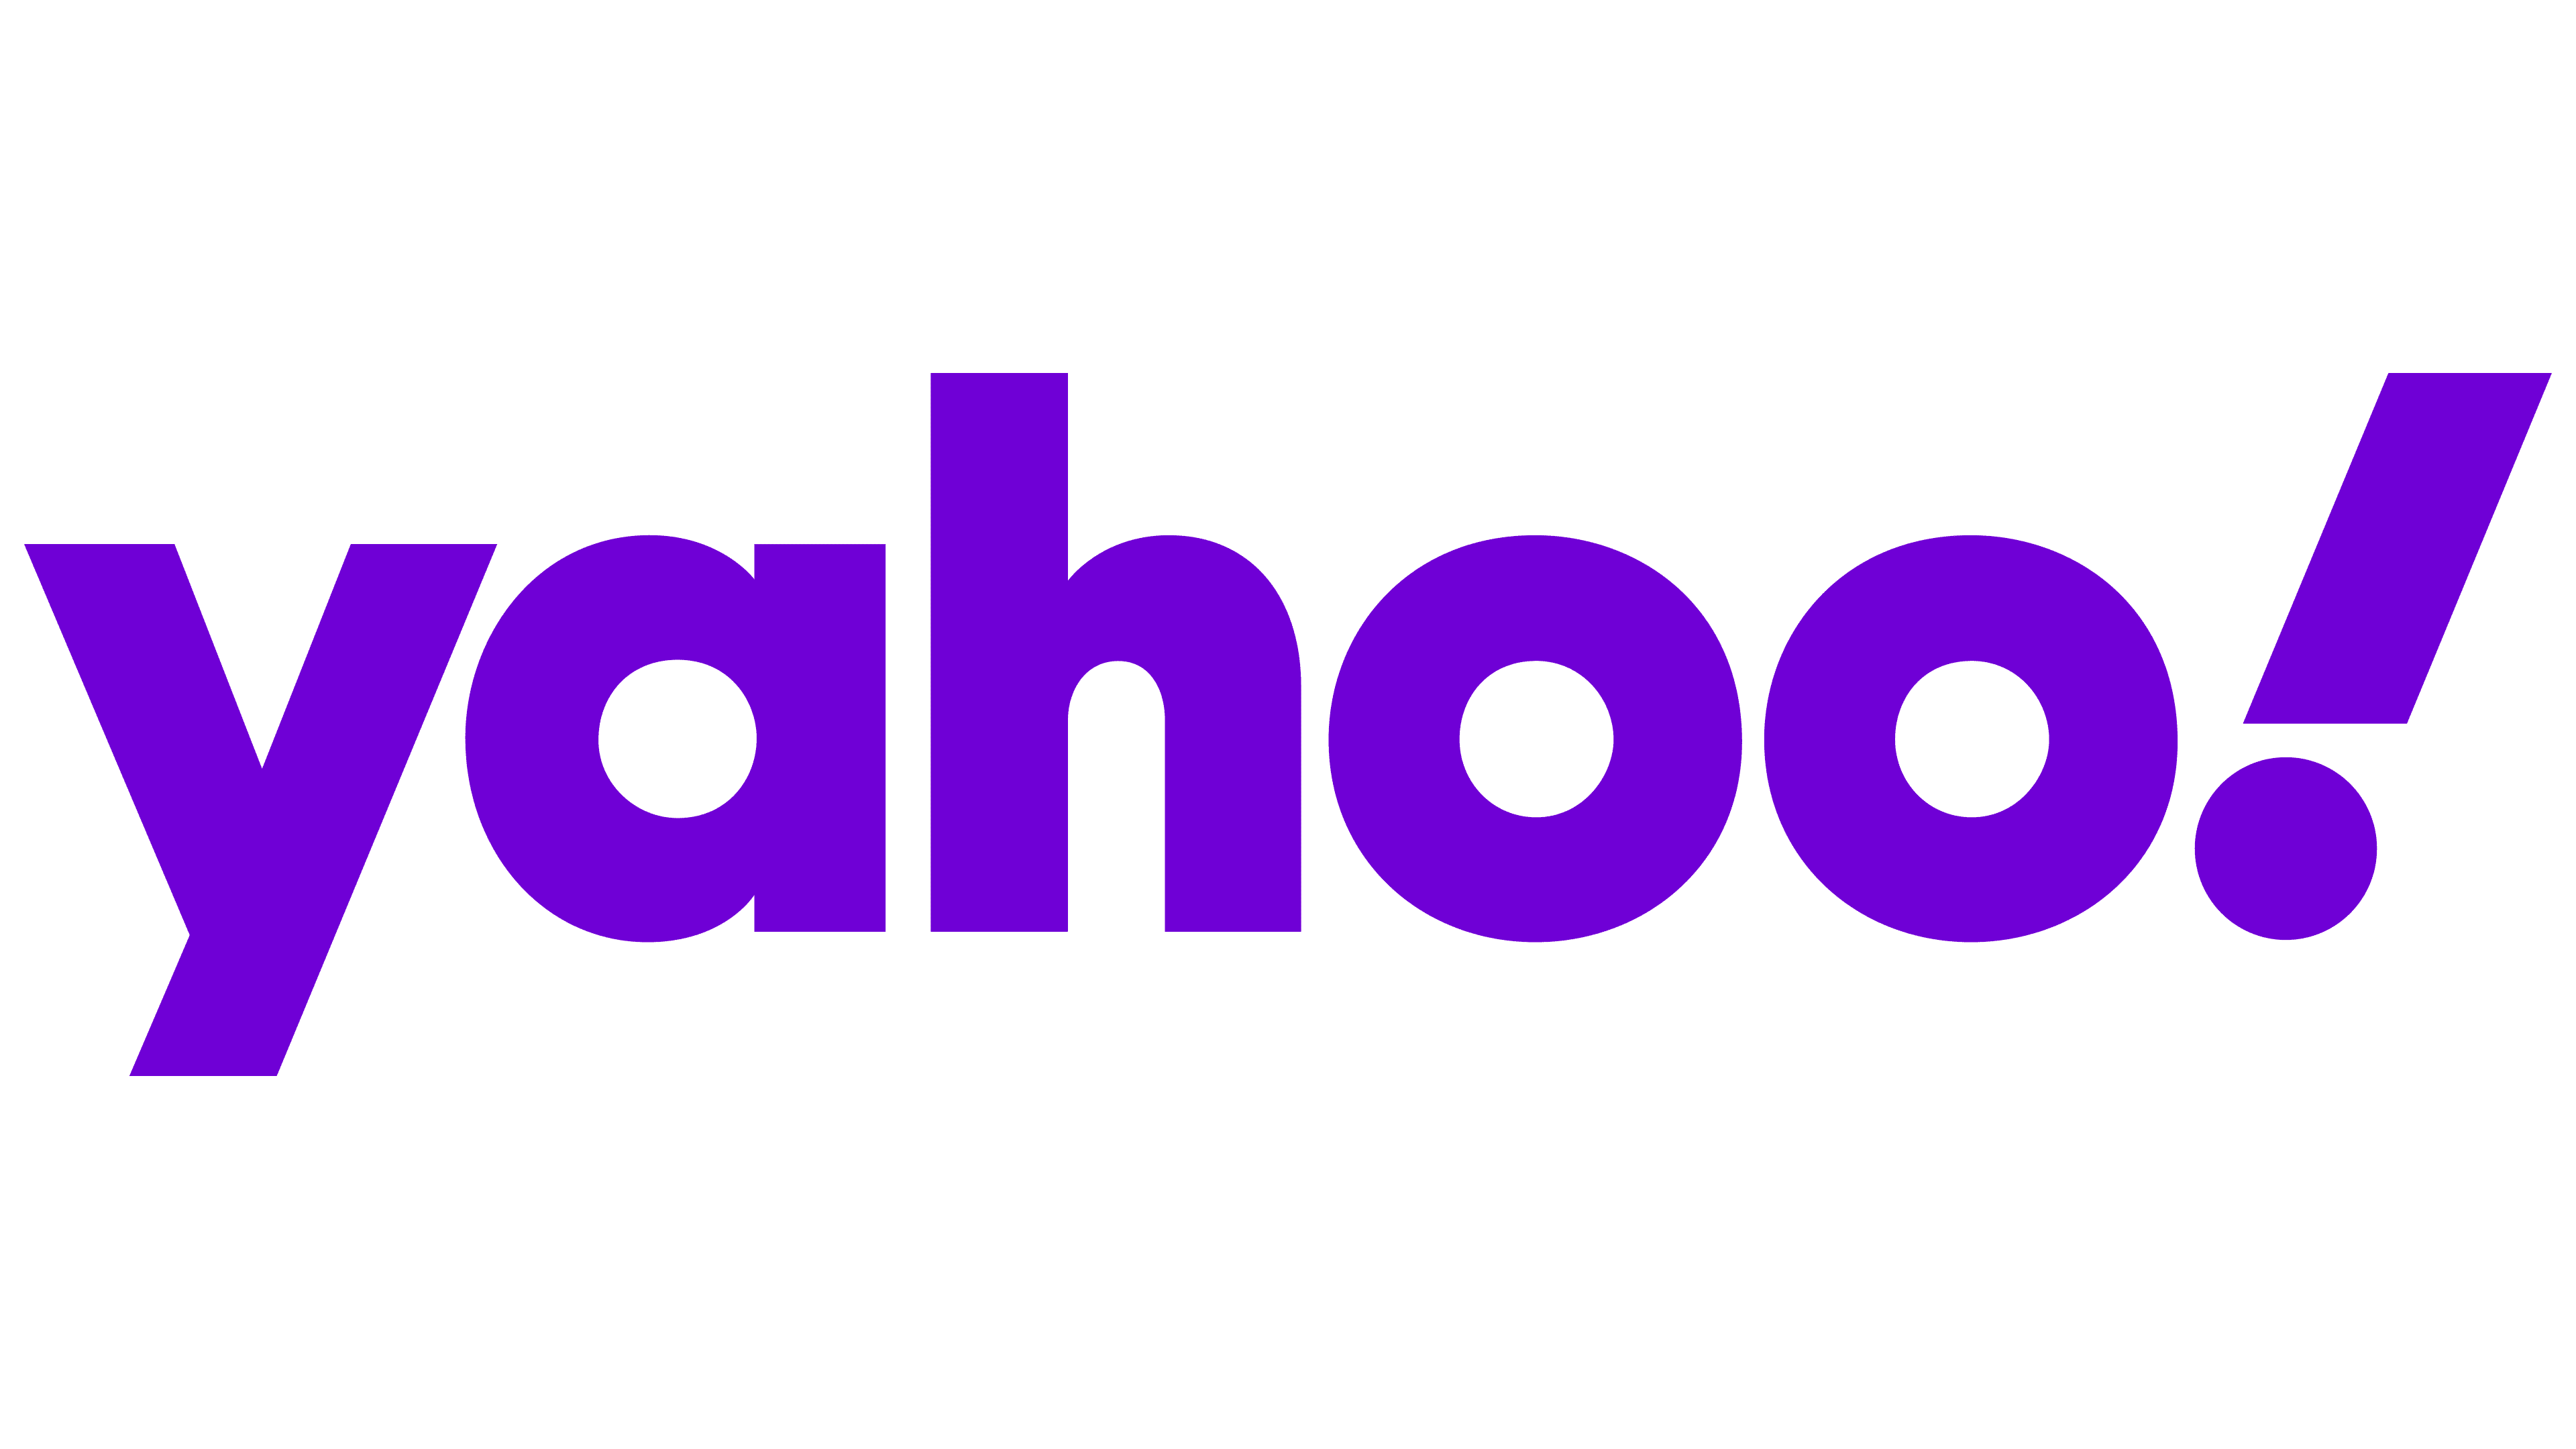 download yahoo search engine for windows 10